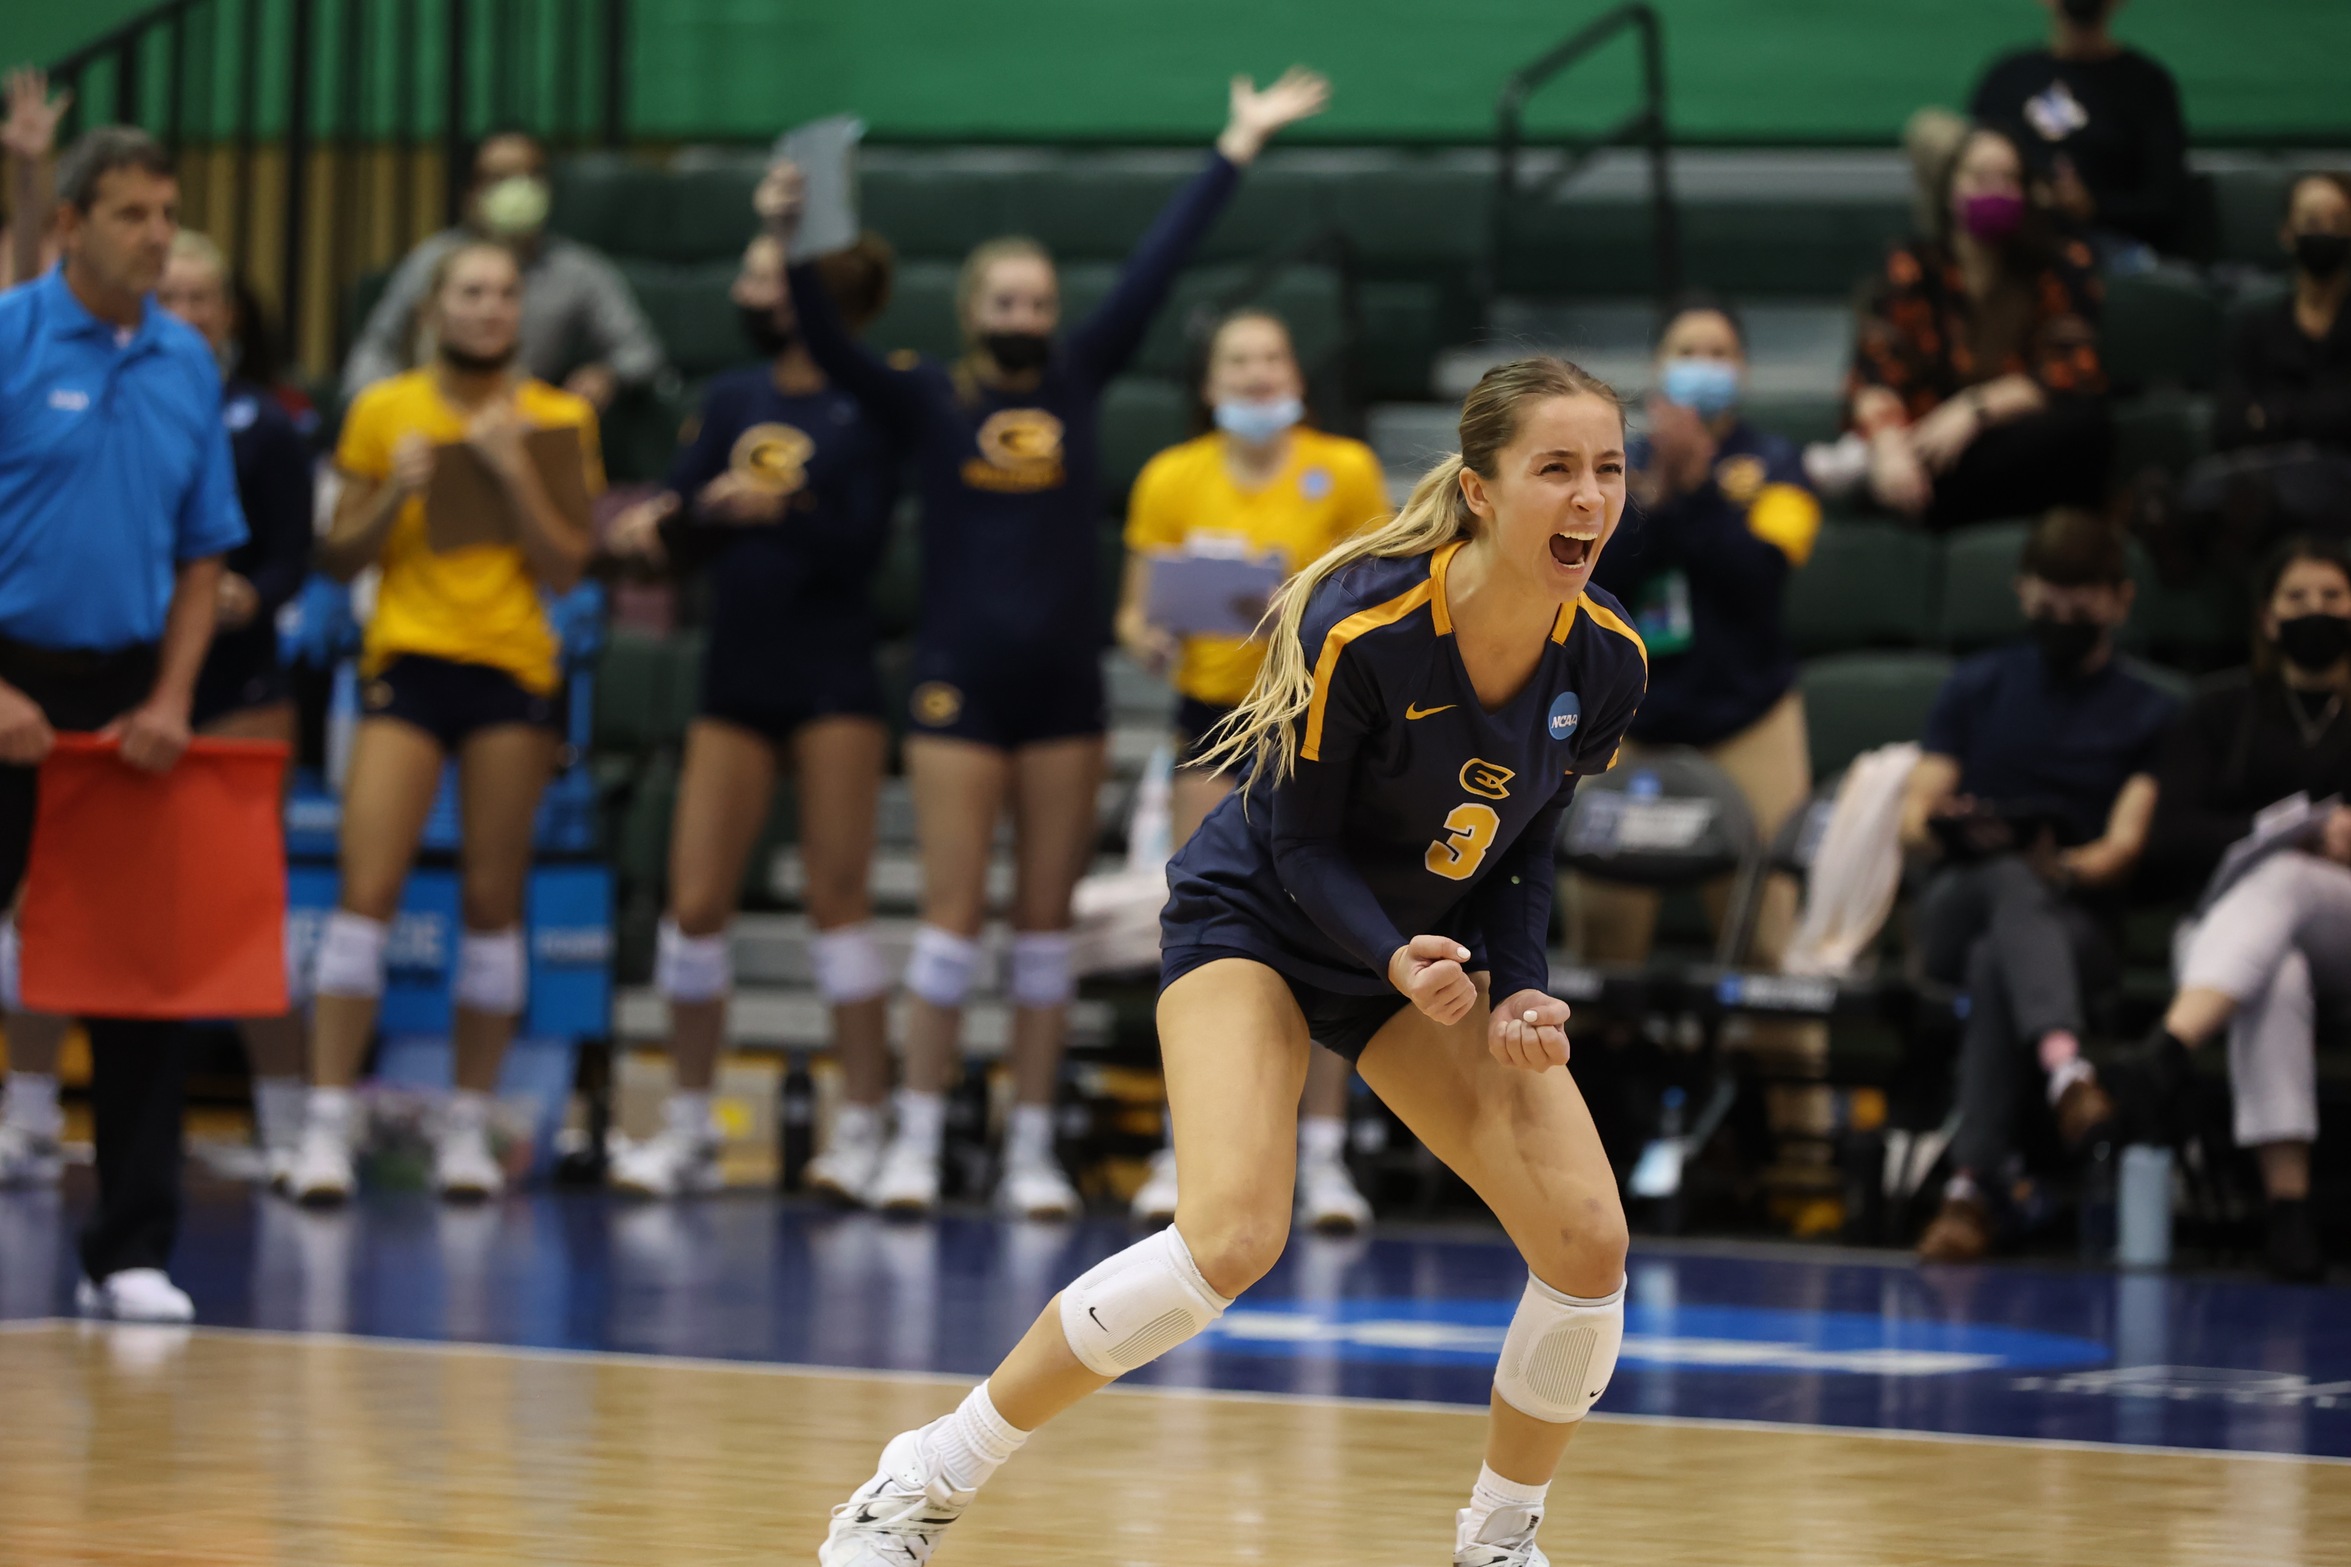 Women's Volleyball Advances to NCAA Semifinals With Sweep Over Tufts